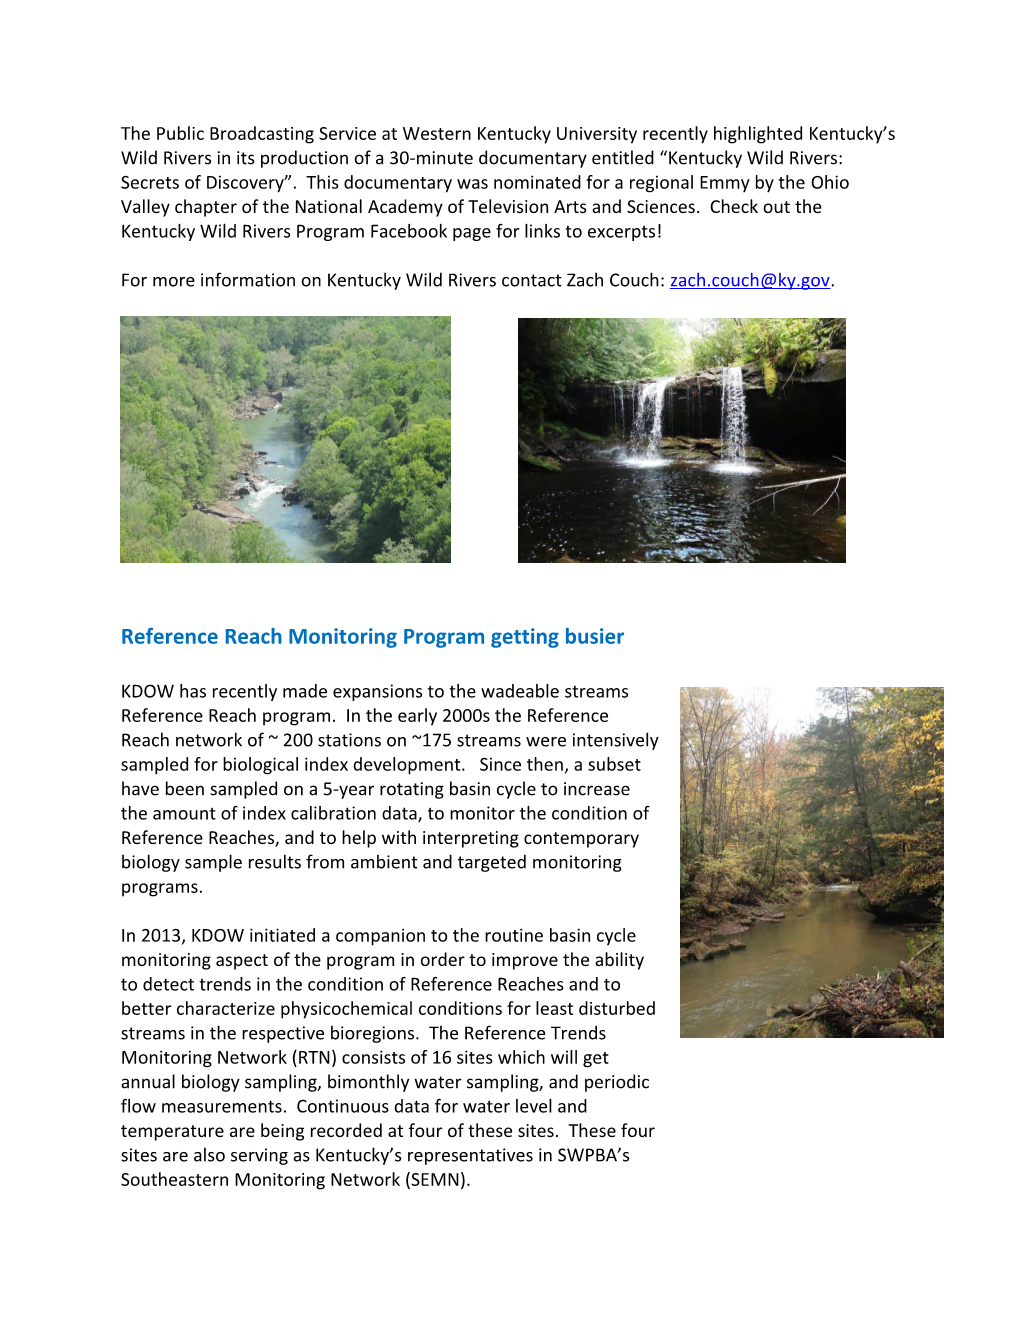 2014 SWPBA Newsletter News from the Bluegrass State